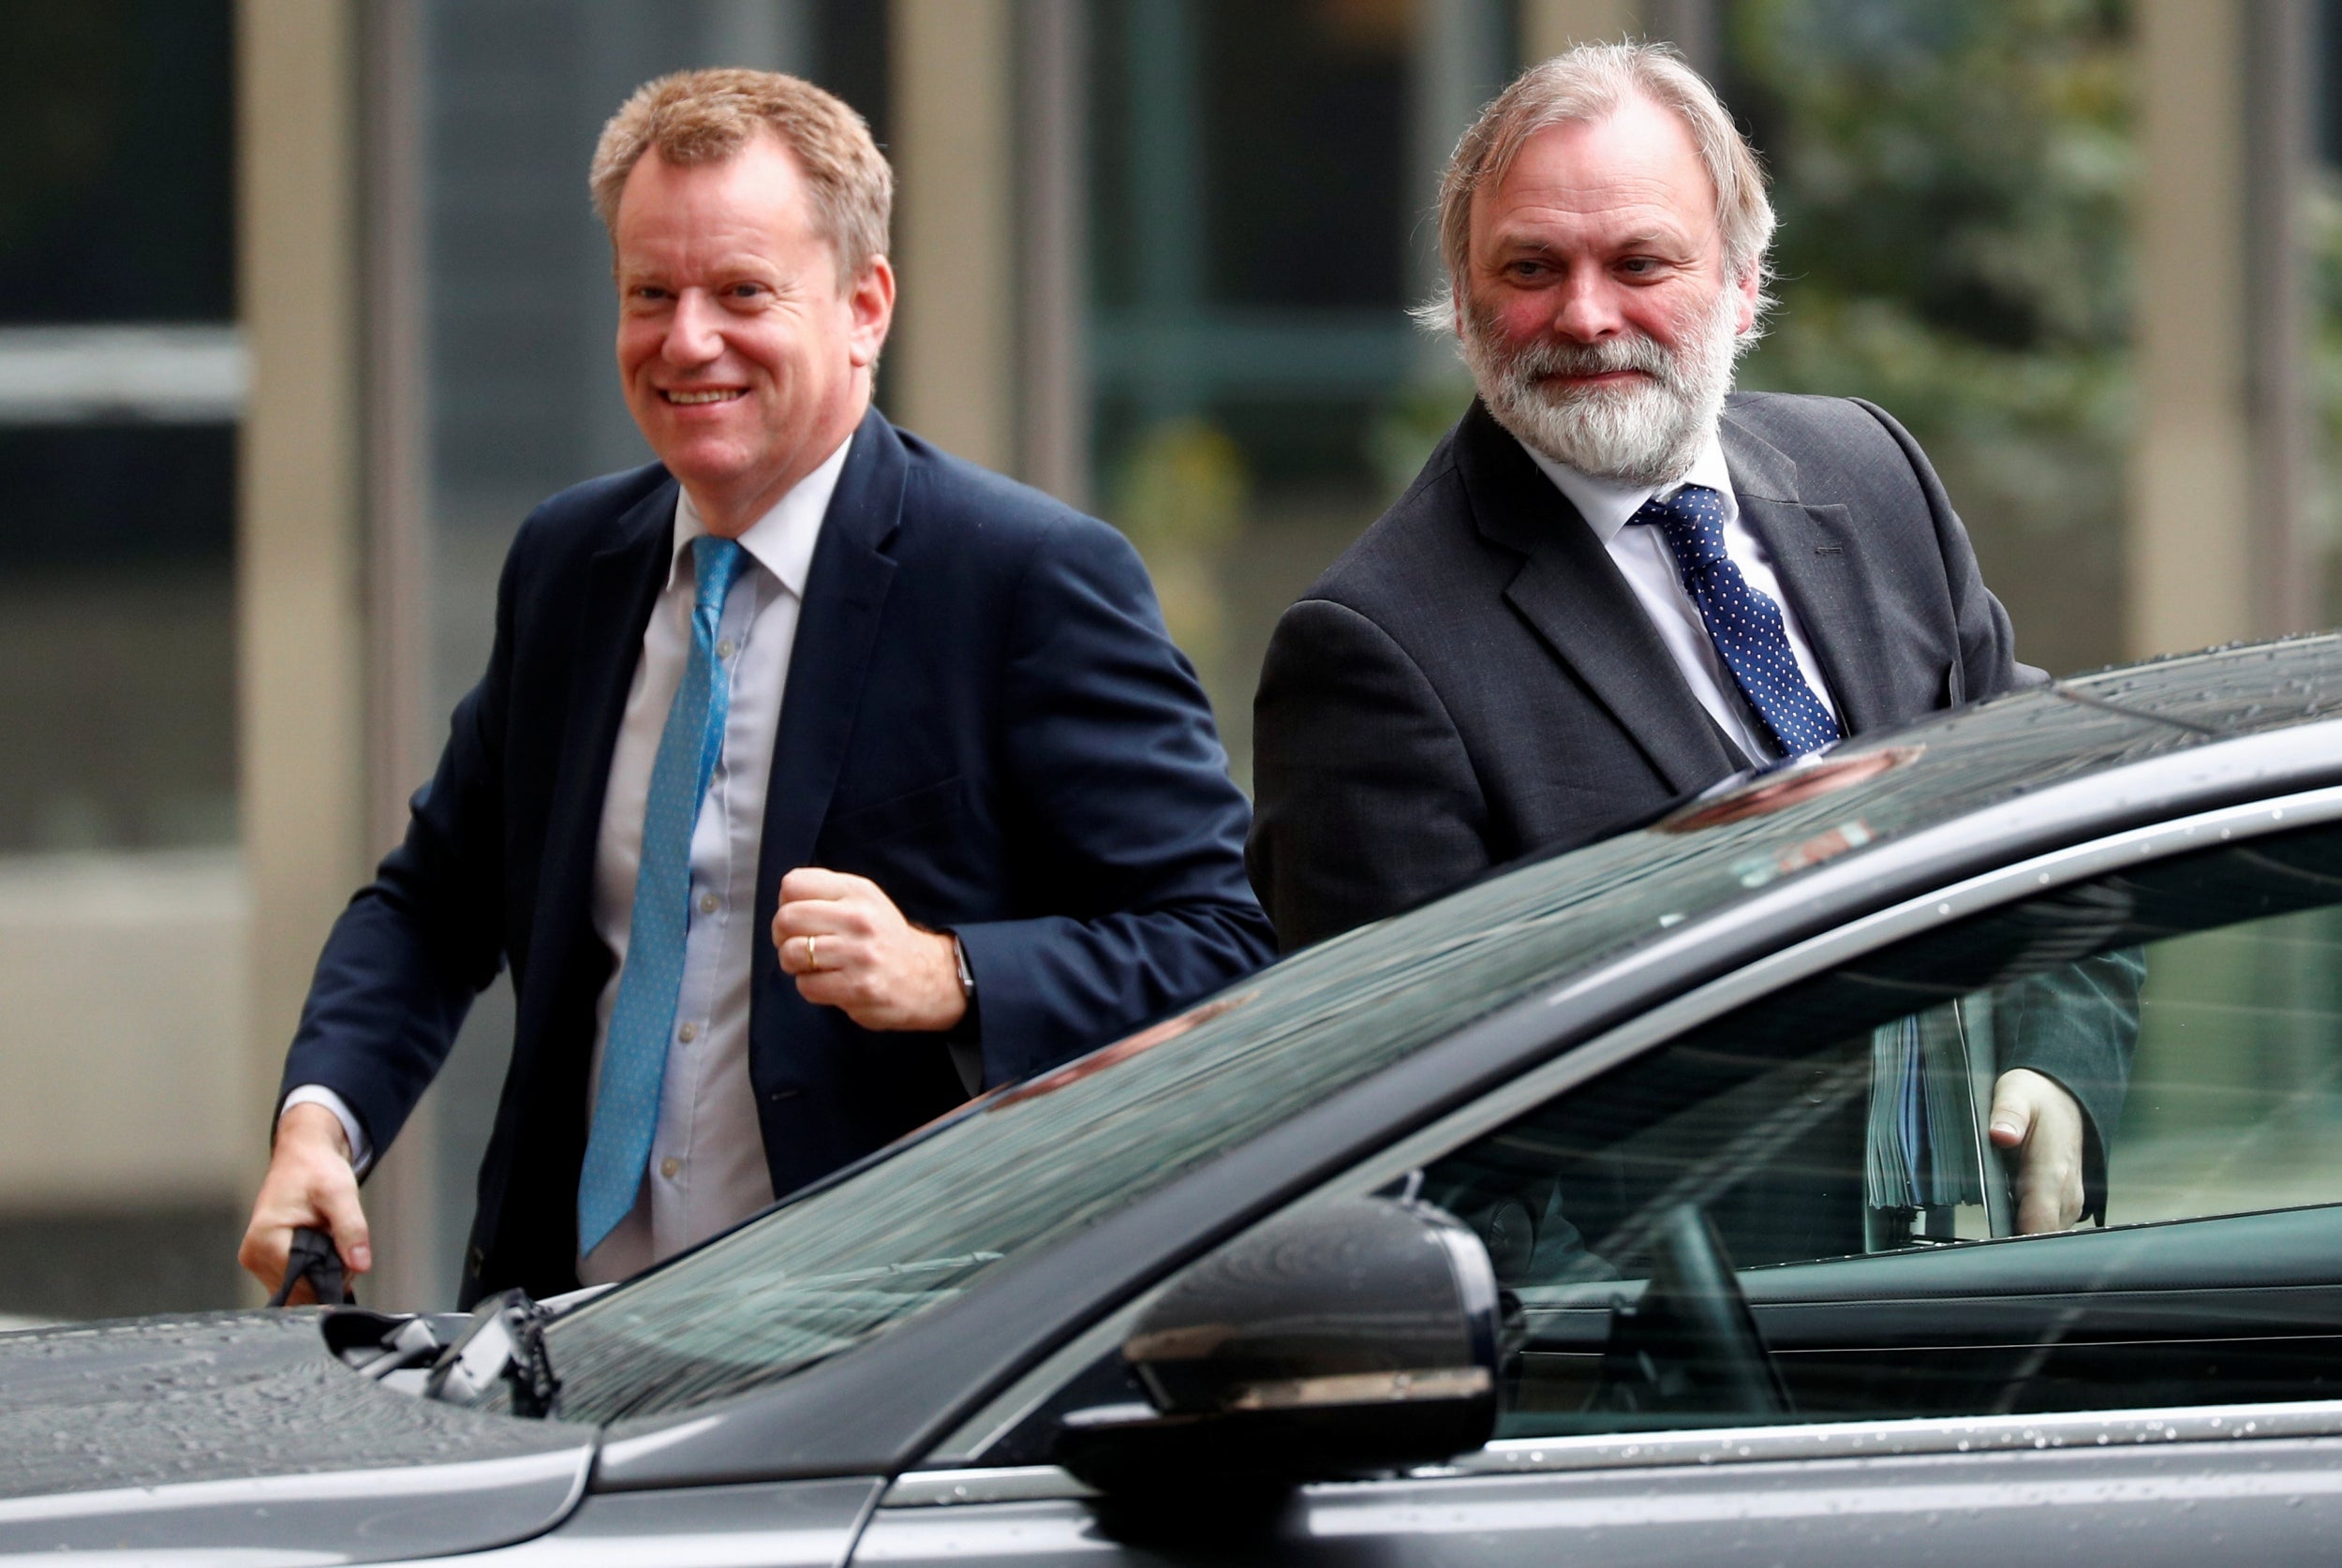 Britain’s permanent representative to the EU Tim Barrow and Johnson’s Europe adviser David Frost arrive at the European Commission headquarters